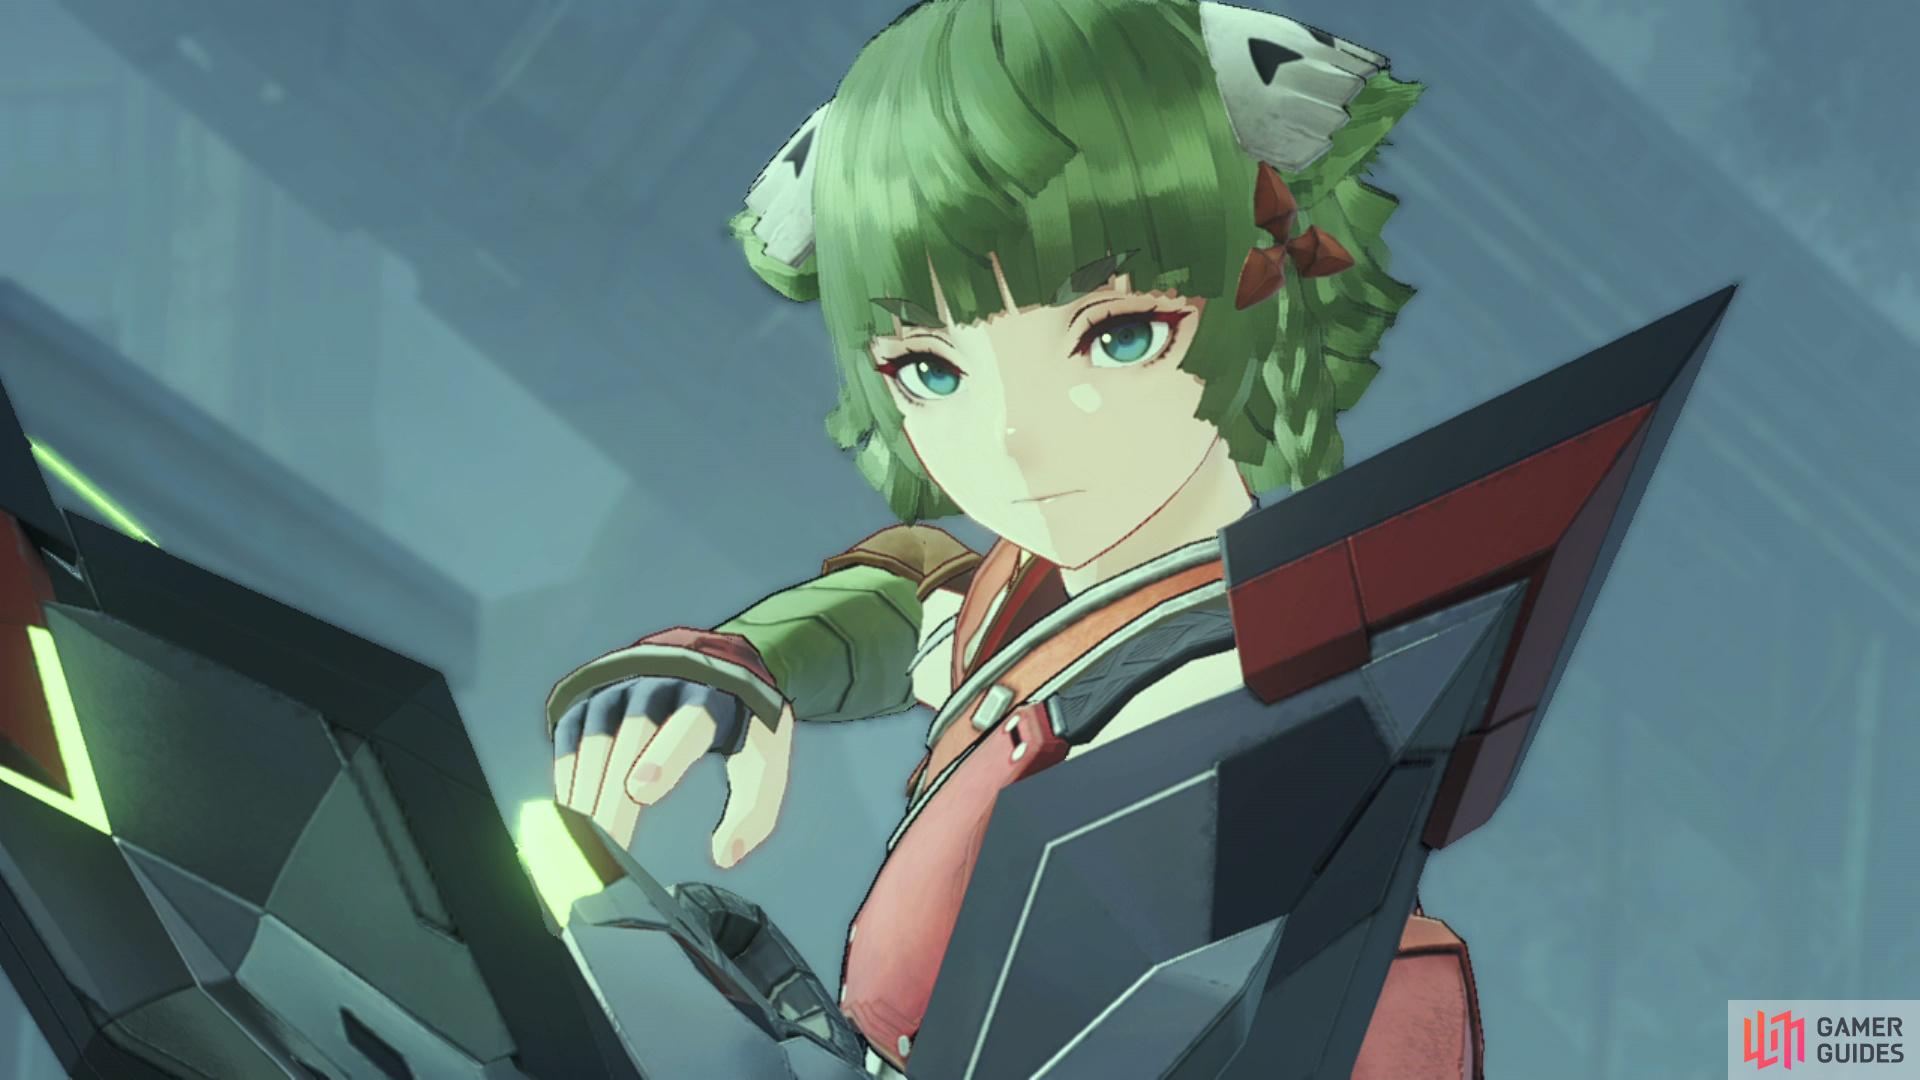 Juniper’s Hero Quest is required as part of the main story in Xenoblade Chronicles 3.